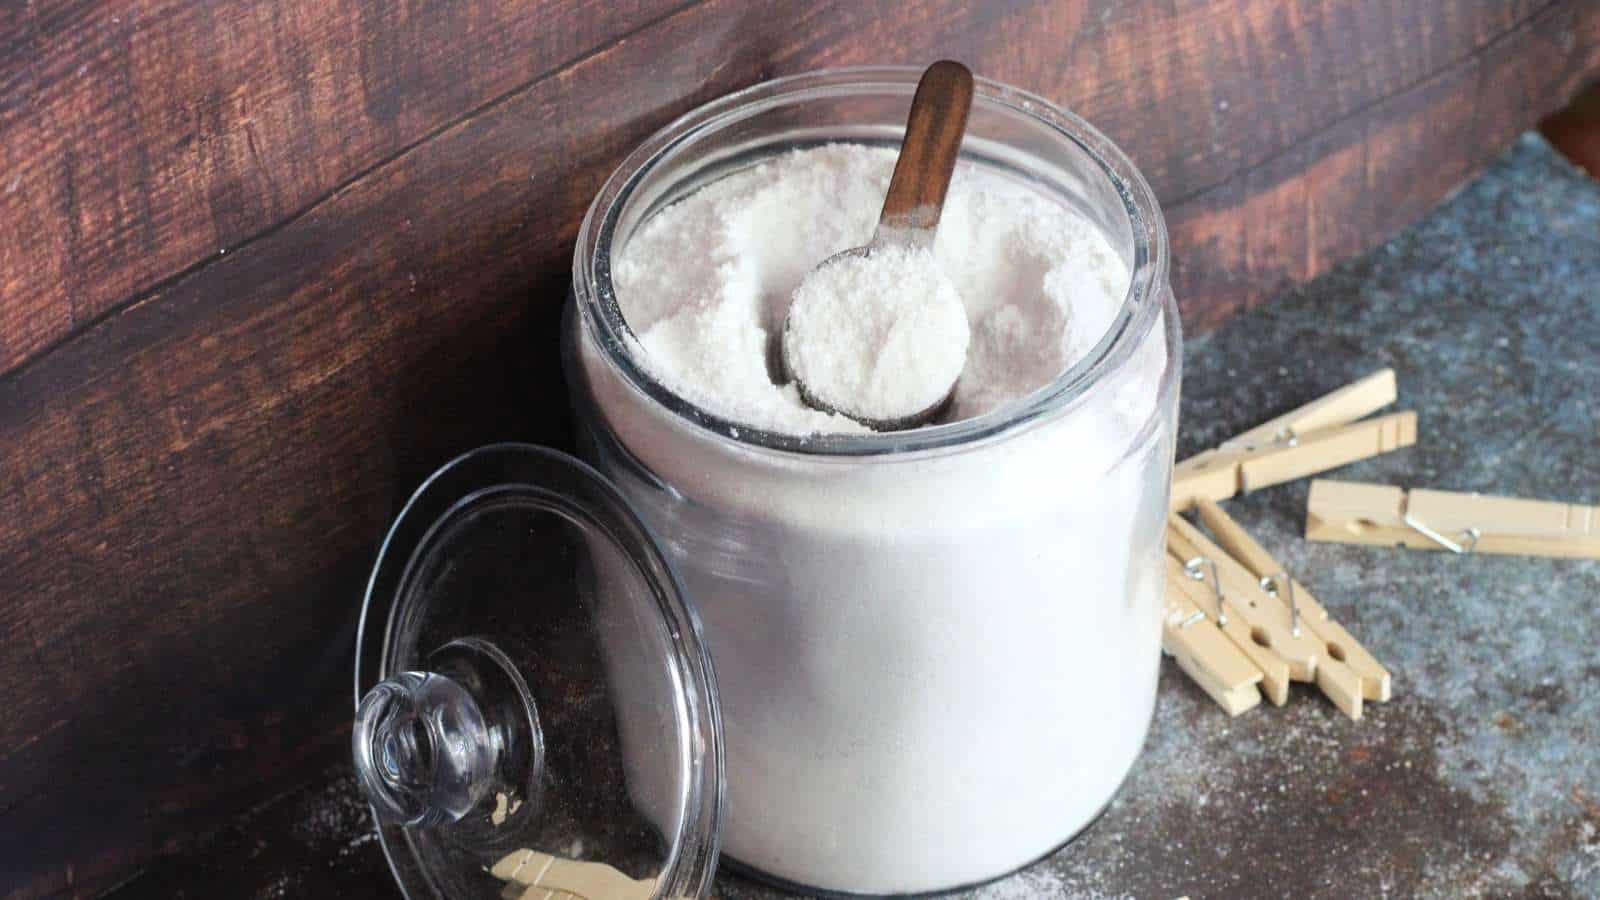 A jar of homemade laundry detergent next to a wooden spoon.